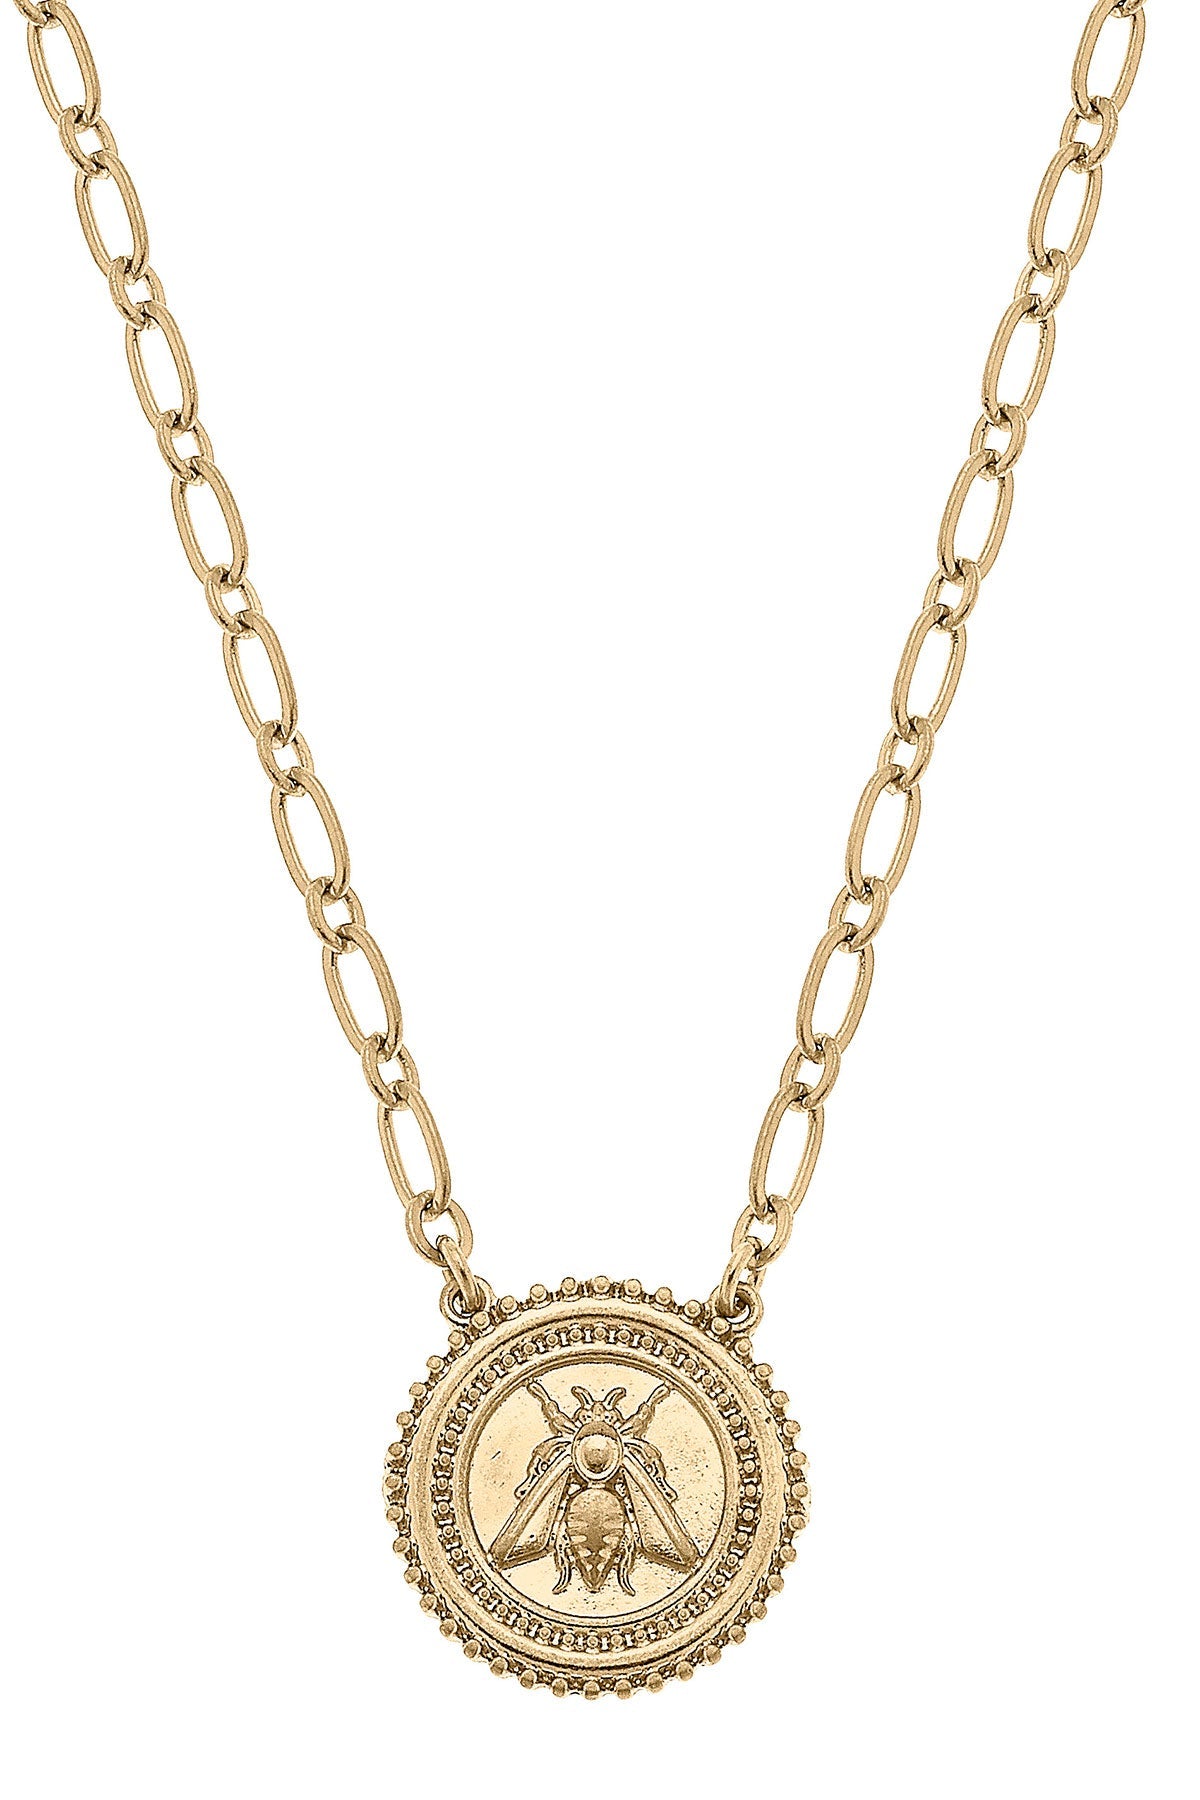 Nicolette Bee Medallion Pendant Necklace in Worn Gold